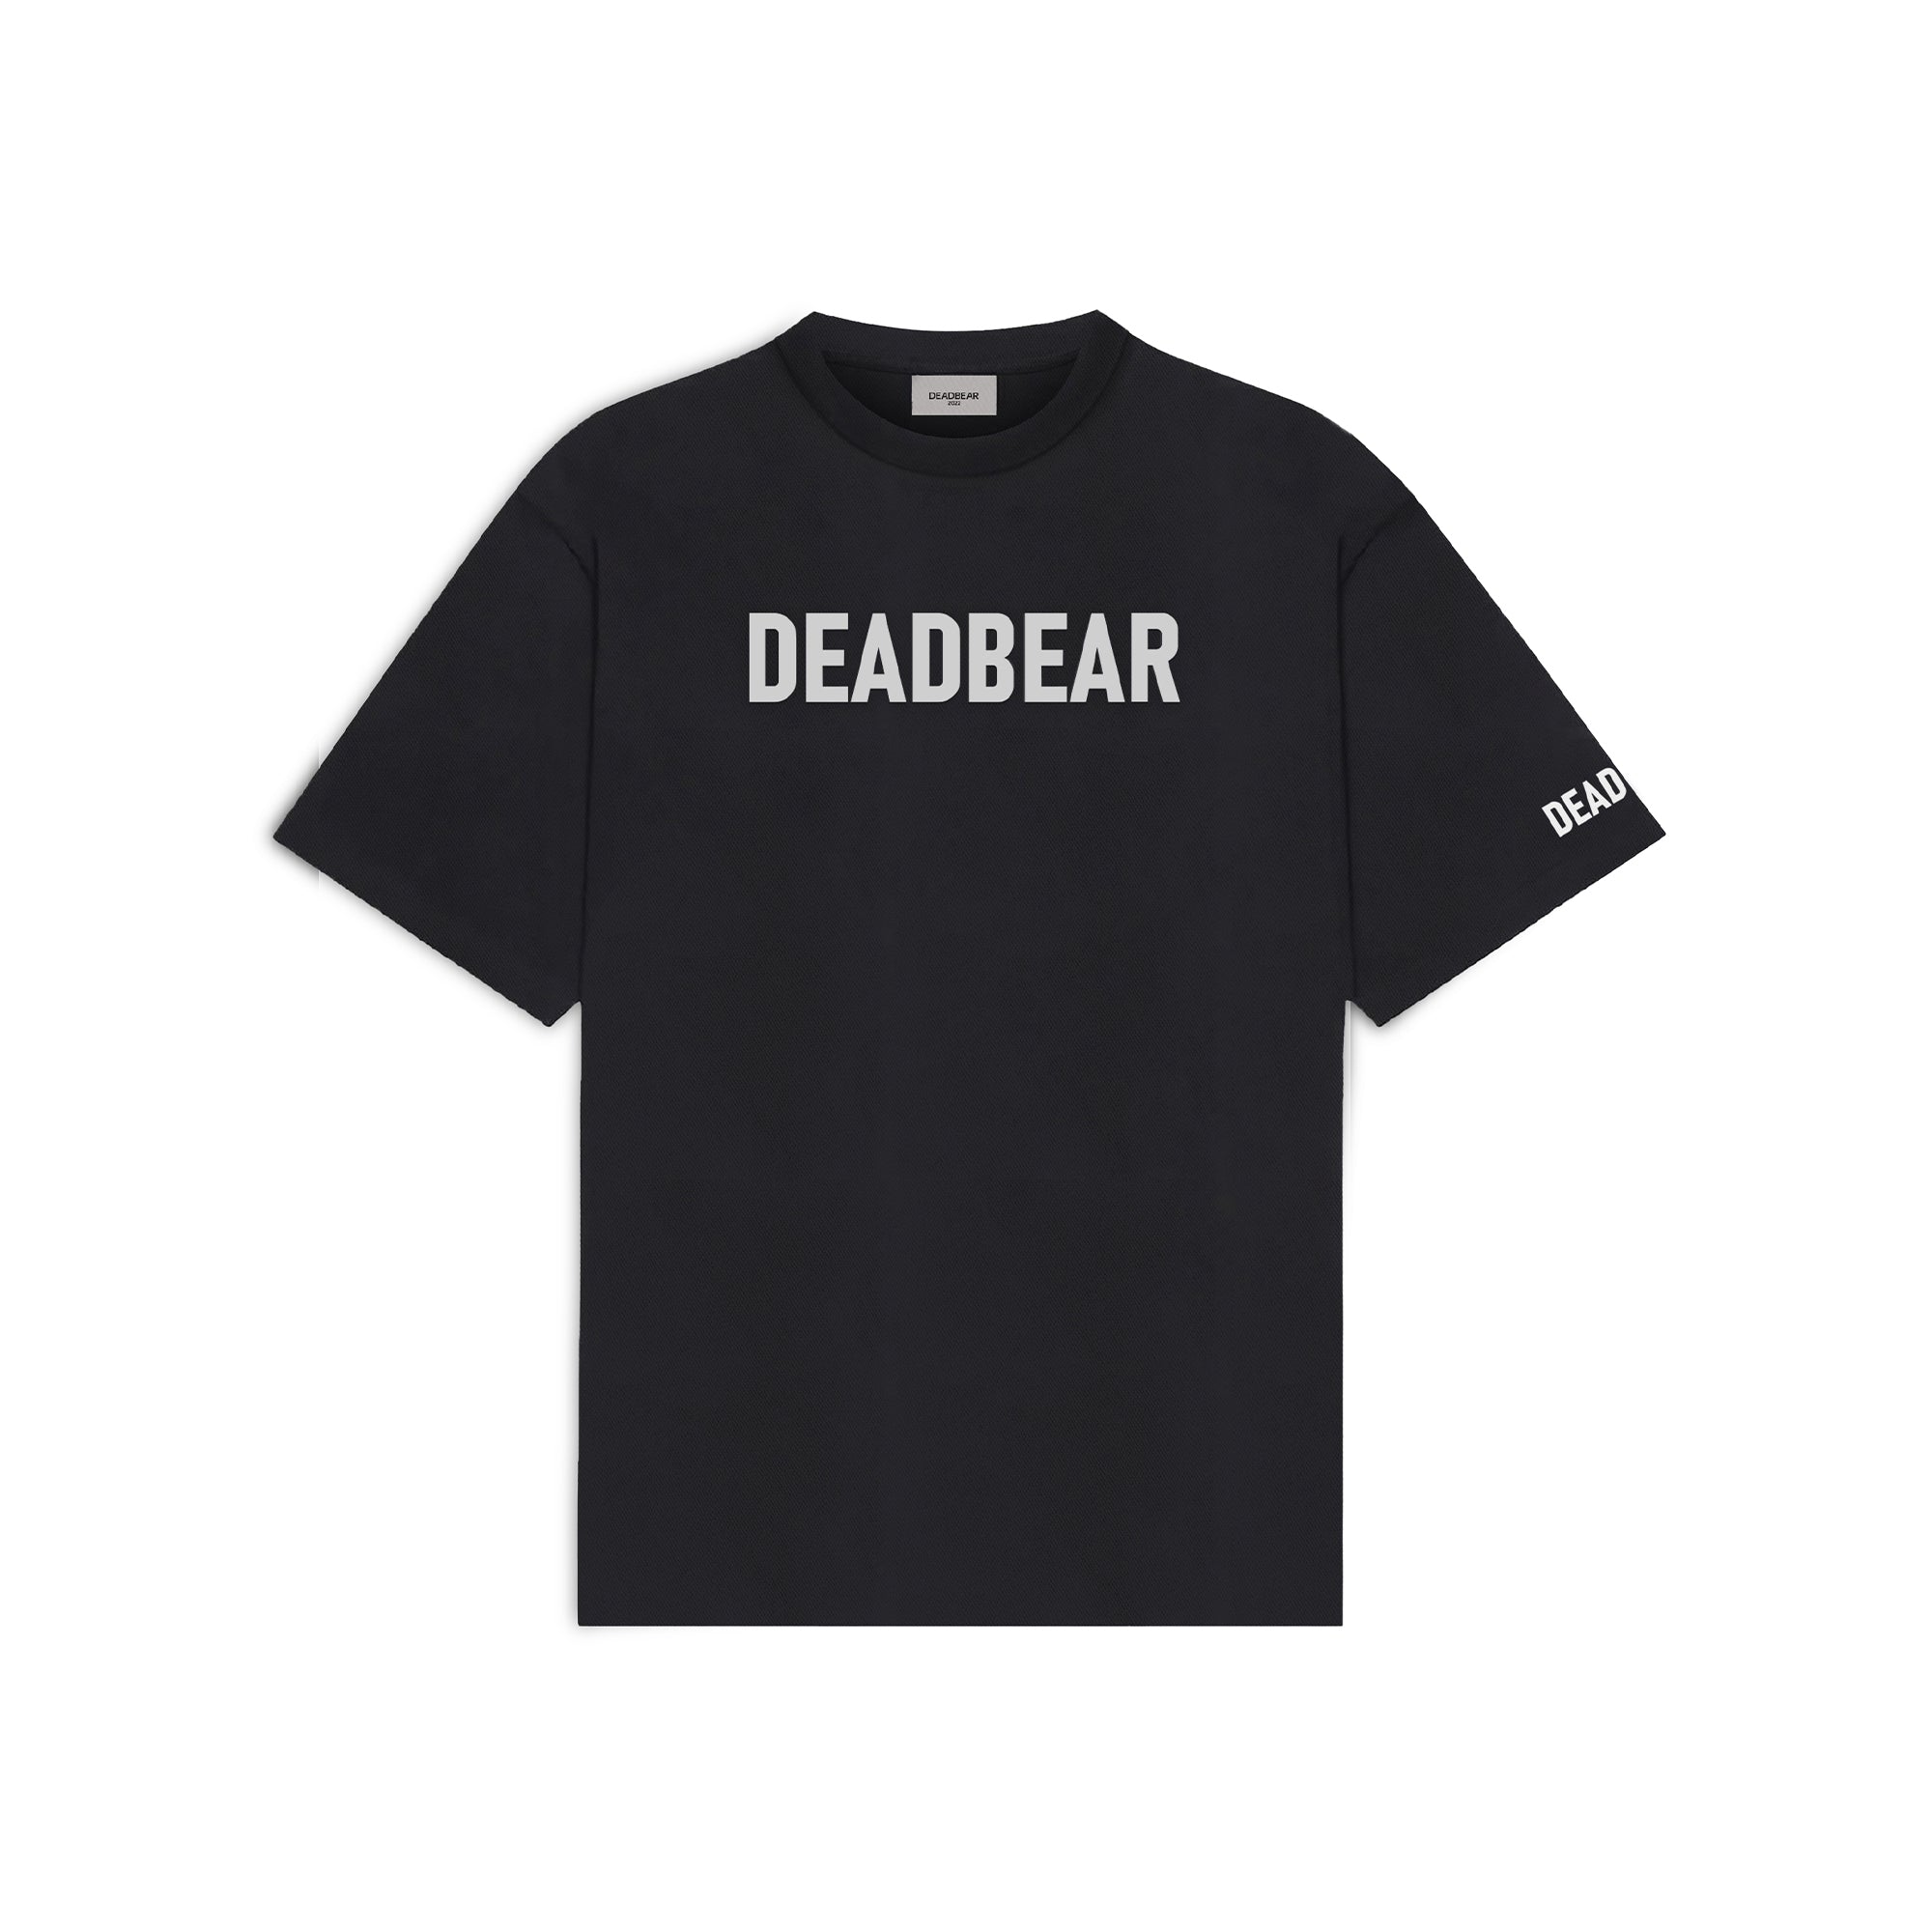 More Dead Than Alive Black Tee